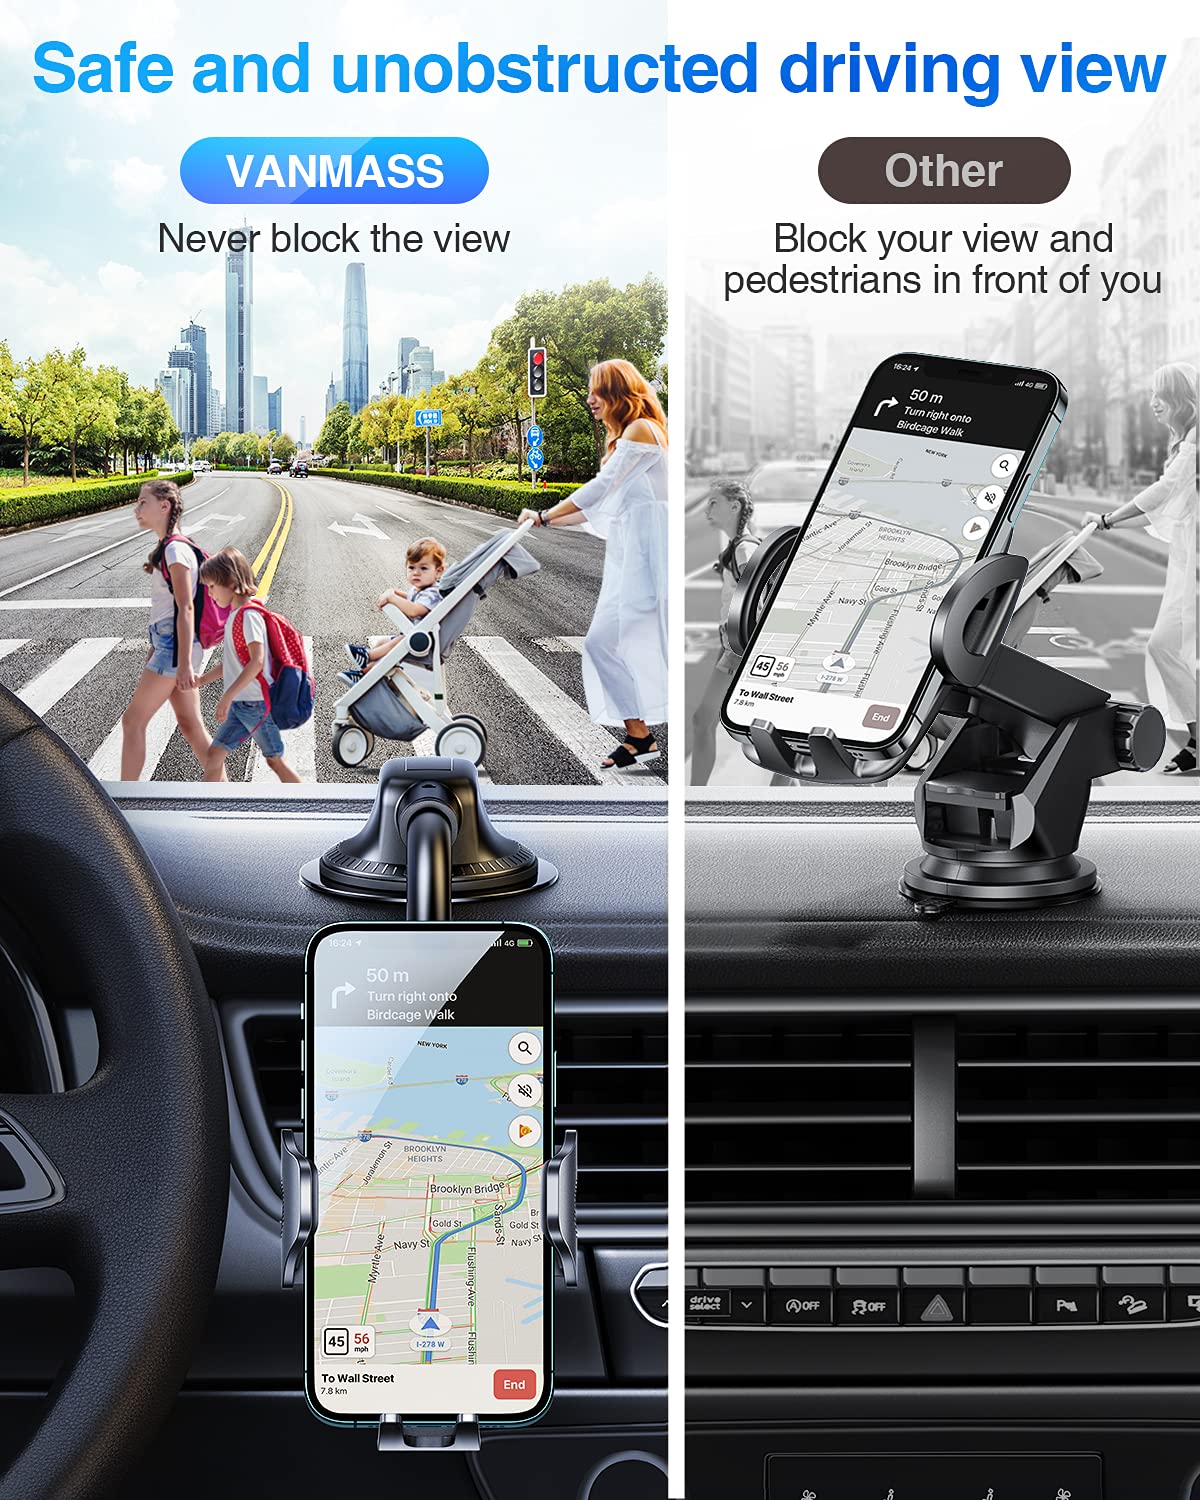 2022 VANMASS Car Phone Holder, [Ultra Flexible & Long Arm] Universal Phone Holder for Car Dashboard Windscreen, Anti-Shake Stabilizer Gooseneck Mobile Phone Mount Compatible with iPhone 13 12 Samsung